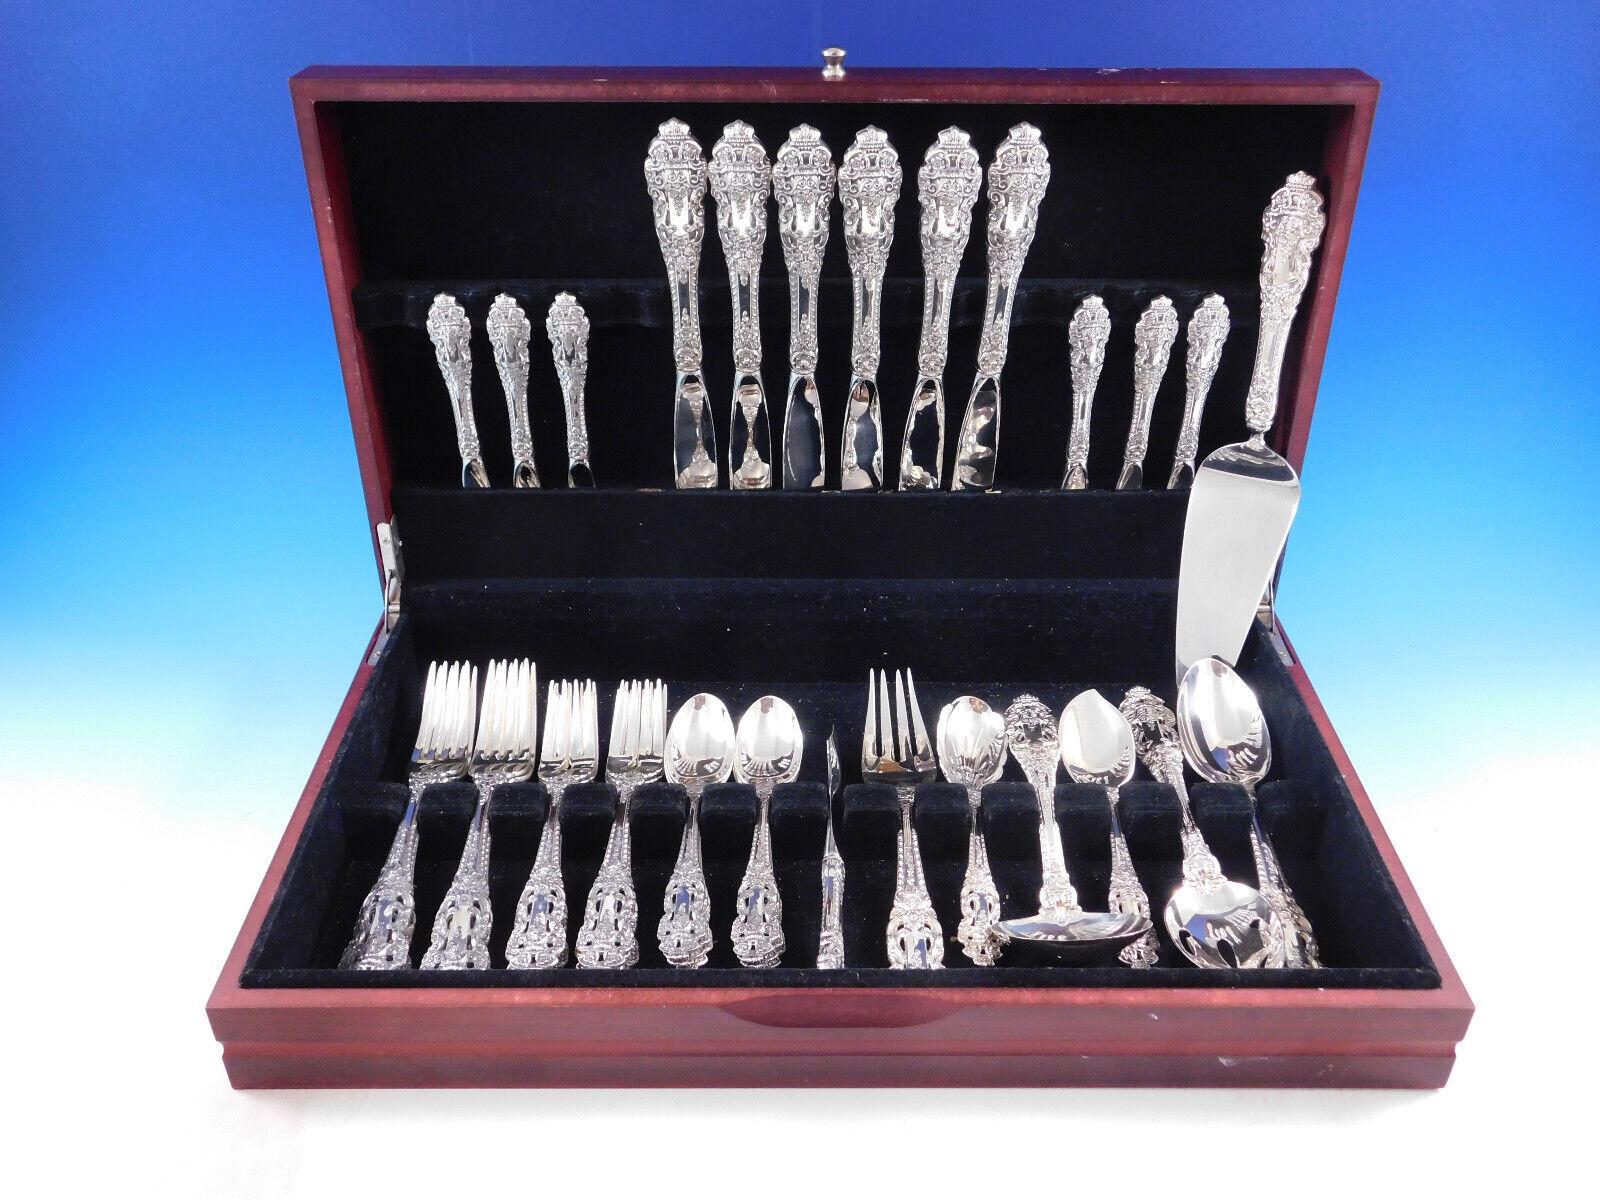 Luxurious Dinner size Buttercup by Gorham sterling silver Flatware set - 38 pieces. This pattern is large, heavy, and impressive. Great starter set! This set includes:

6 Dinner Knives, 10